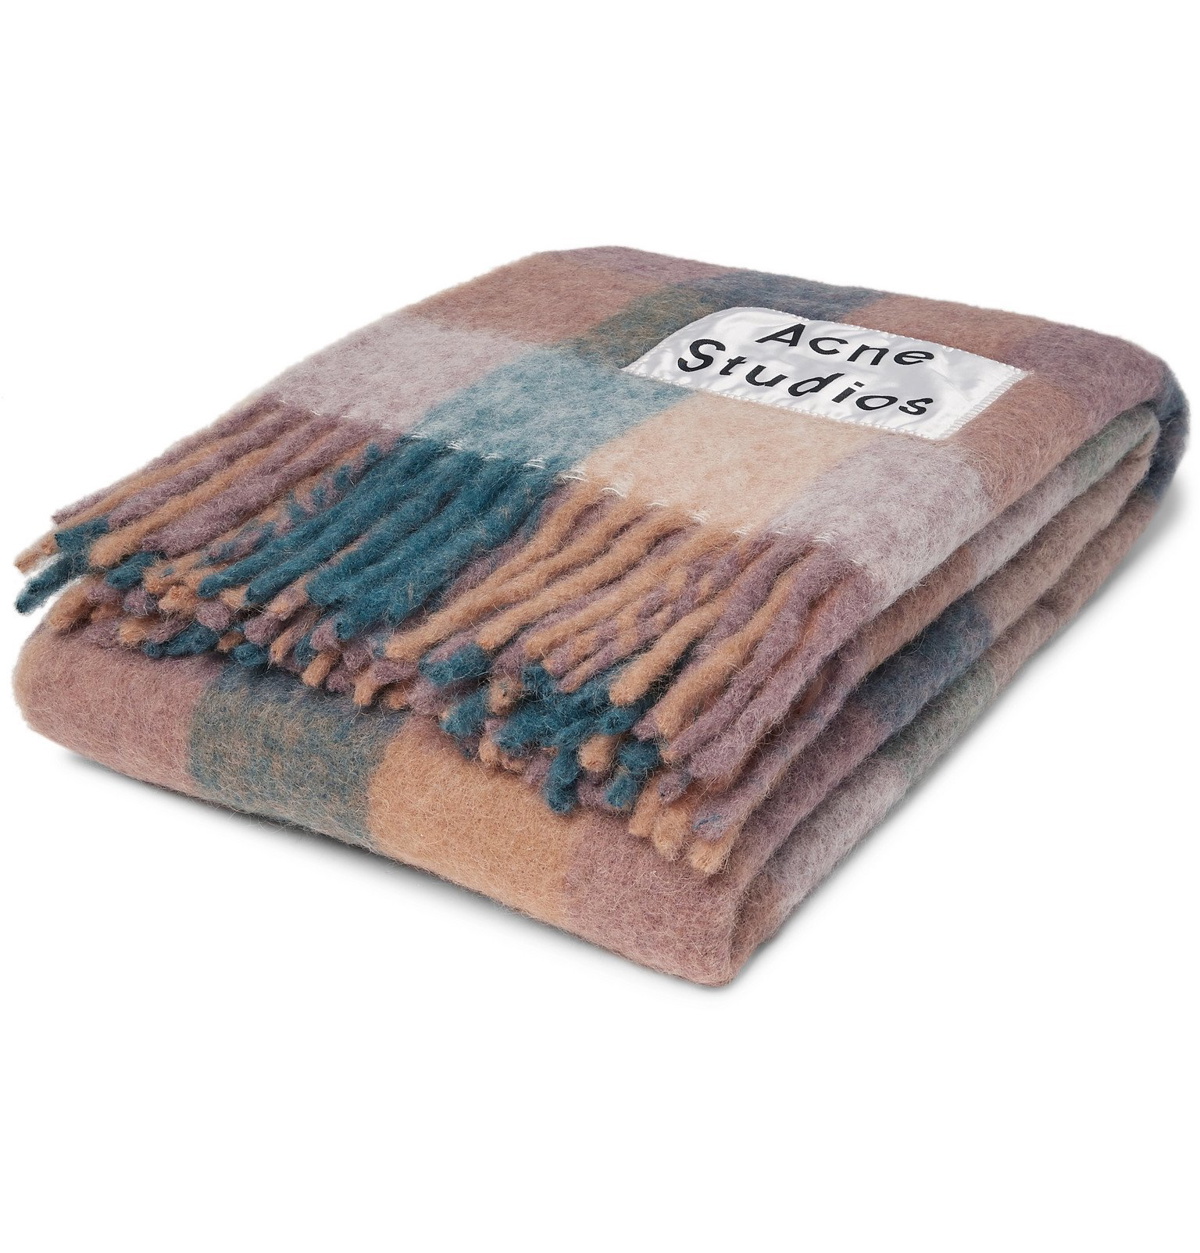 ACNE STUDIOS Vally fringed checked knitted scarf